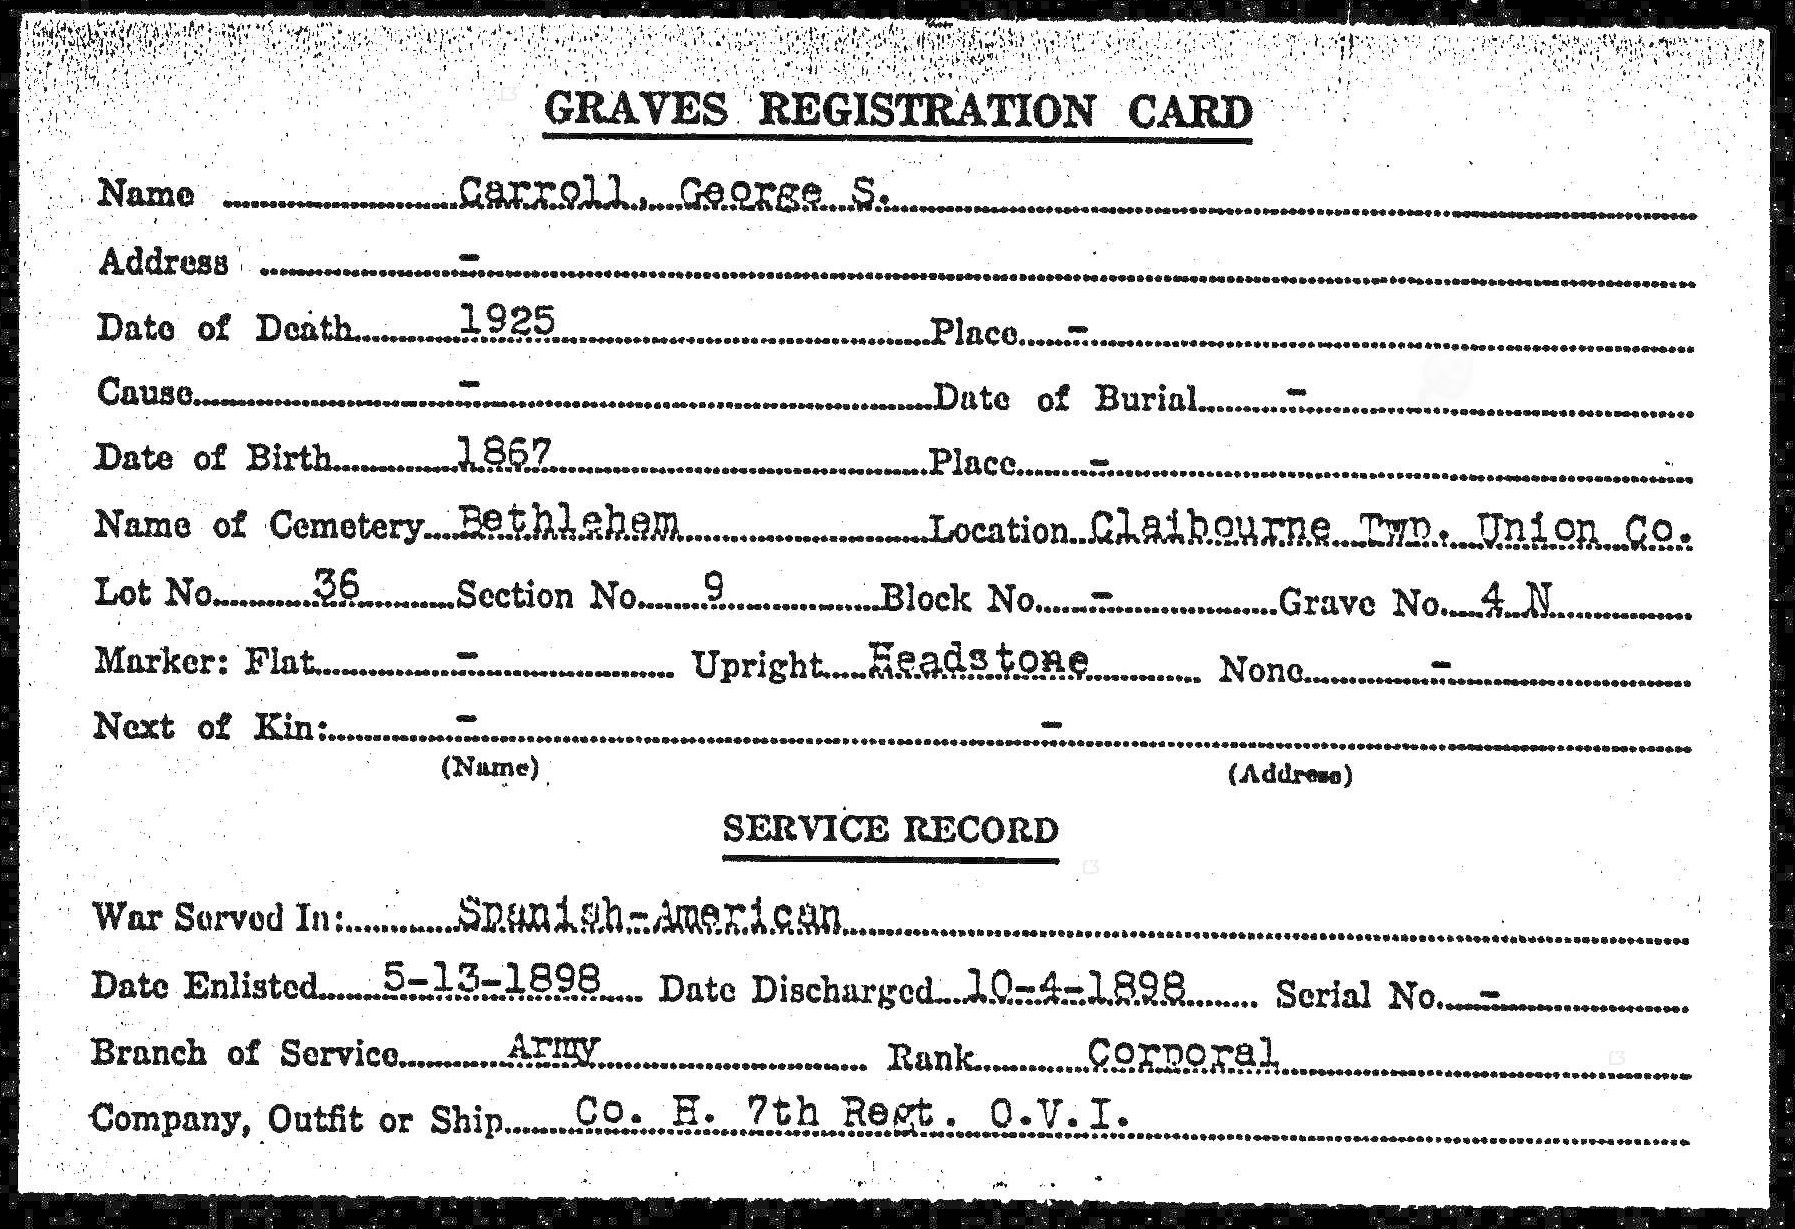 Examples of a WPA Civilian Grave Registry Card and Veteran Graves Registration Card from Claibourne/Bethlehem Cemetery. If Micheal Brucker was recorded by the WPA, we could not find his card in the collection.